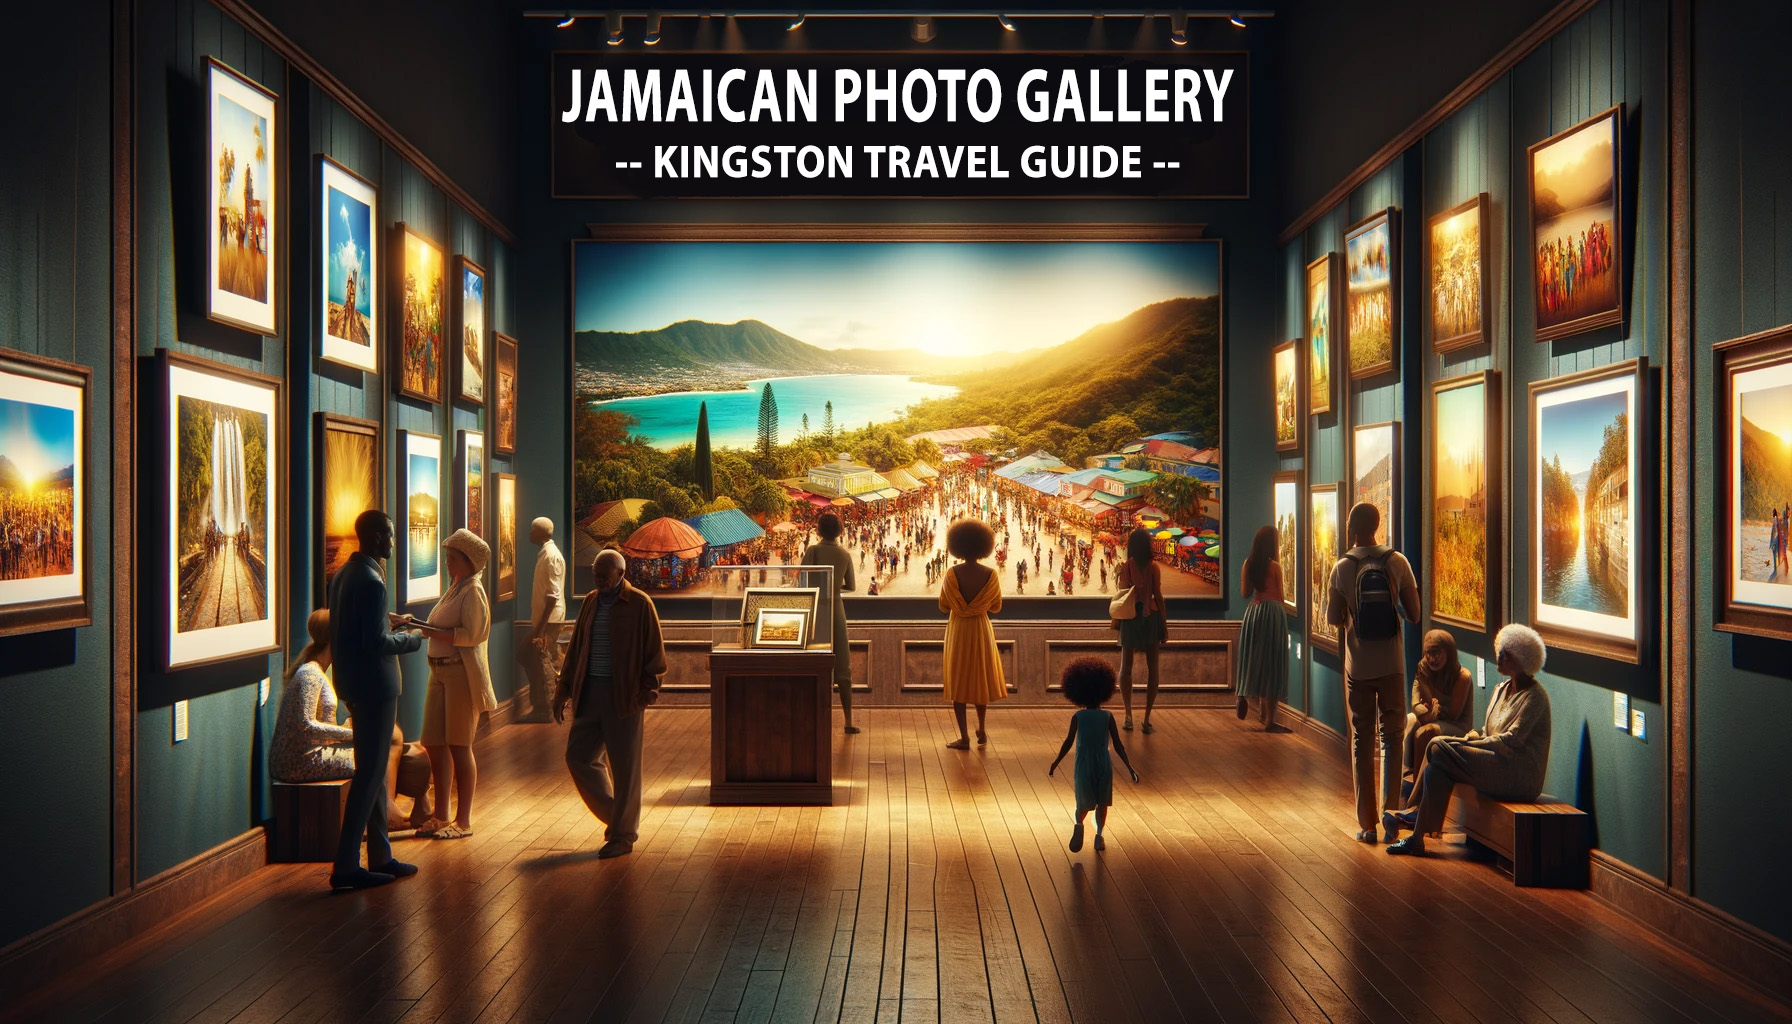 Jamaican Photo Gallery - Kingston Travel Guide